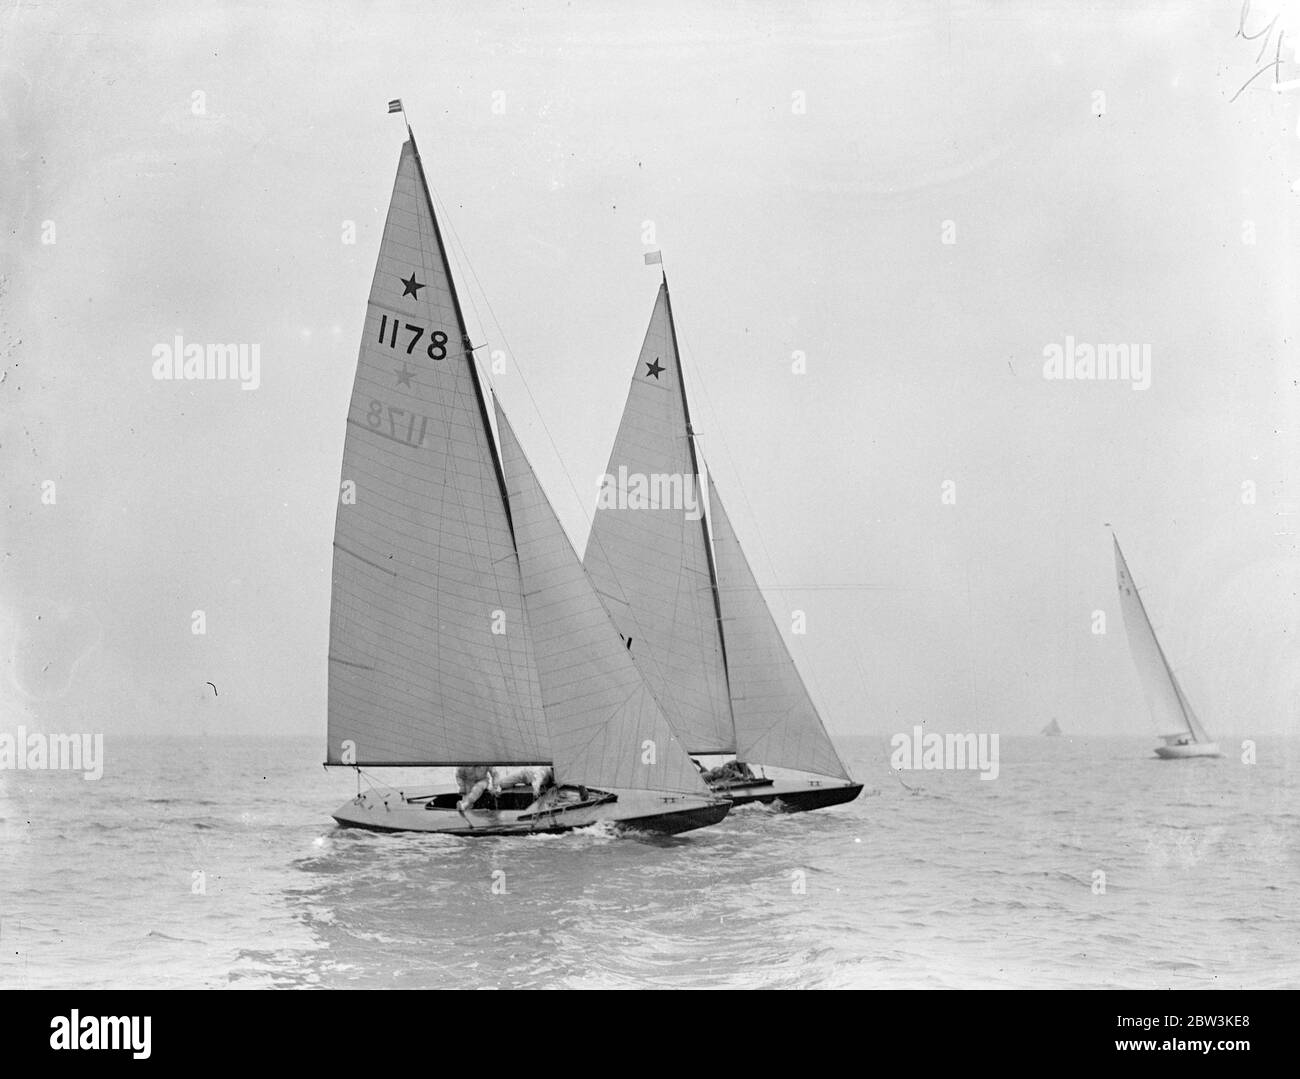 Yachts compete in Olympic games trials at Burnham on Crouch . The Olympic Games eliminating trials for six meter , monotype and star class yachts held under the suspices of the Royal Corinthian Yacht Club , took place at Burnham on Crouch , Essex . The races are being held to choose the best representatives among those entered to race at Kiel in the August Olympic games . Photo shows , Lady Betty ( 1178 ) owned by Colin Ratsey and another international star slass yacht rounding a buoy during the races at Burnham . 13 May 1936 Stock Photo